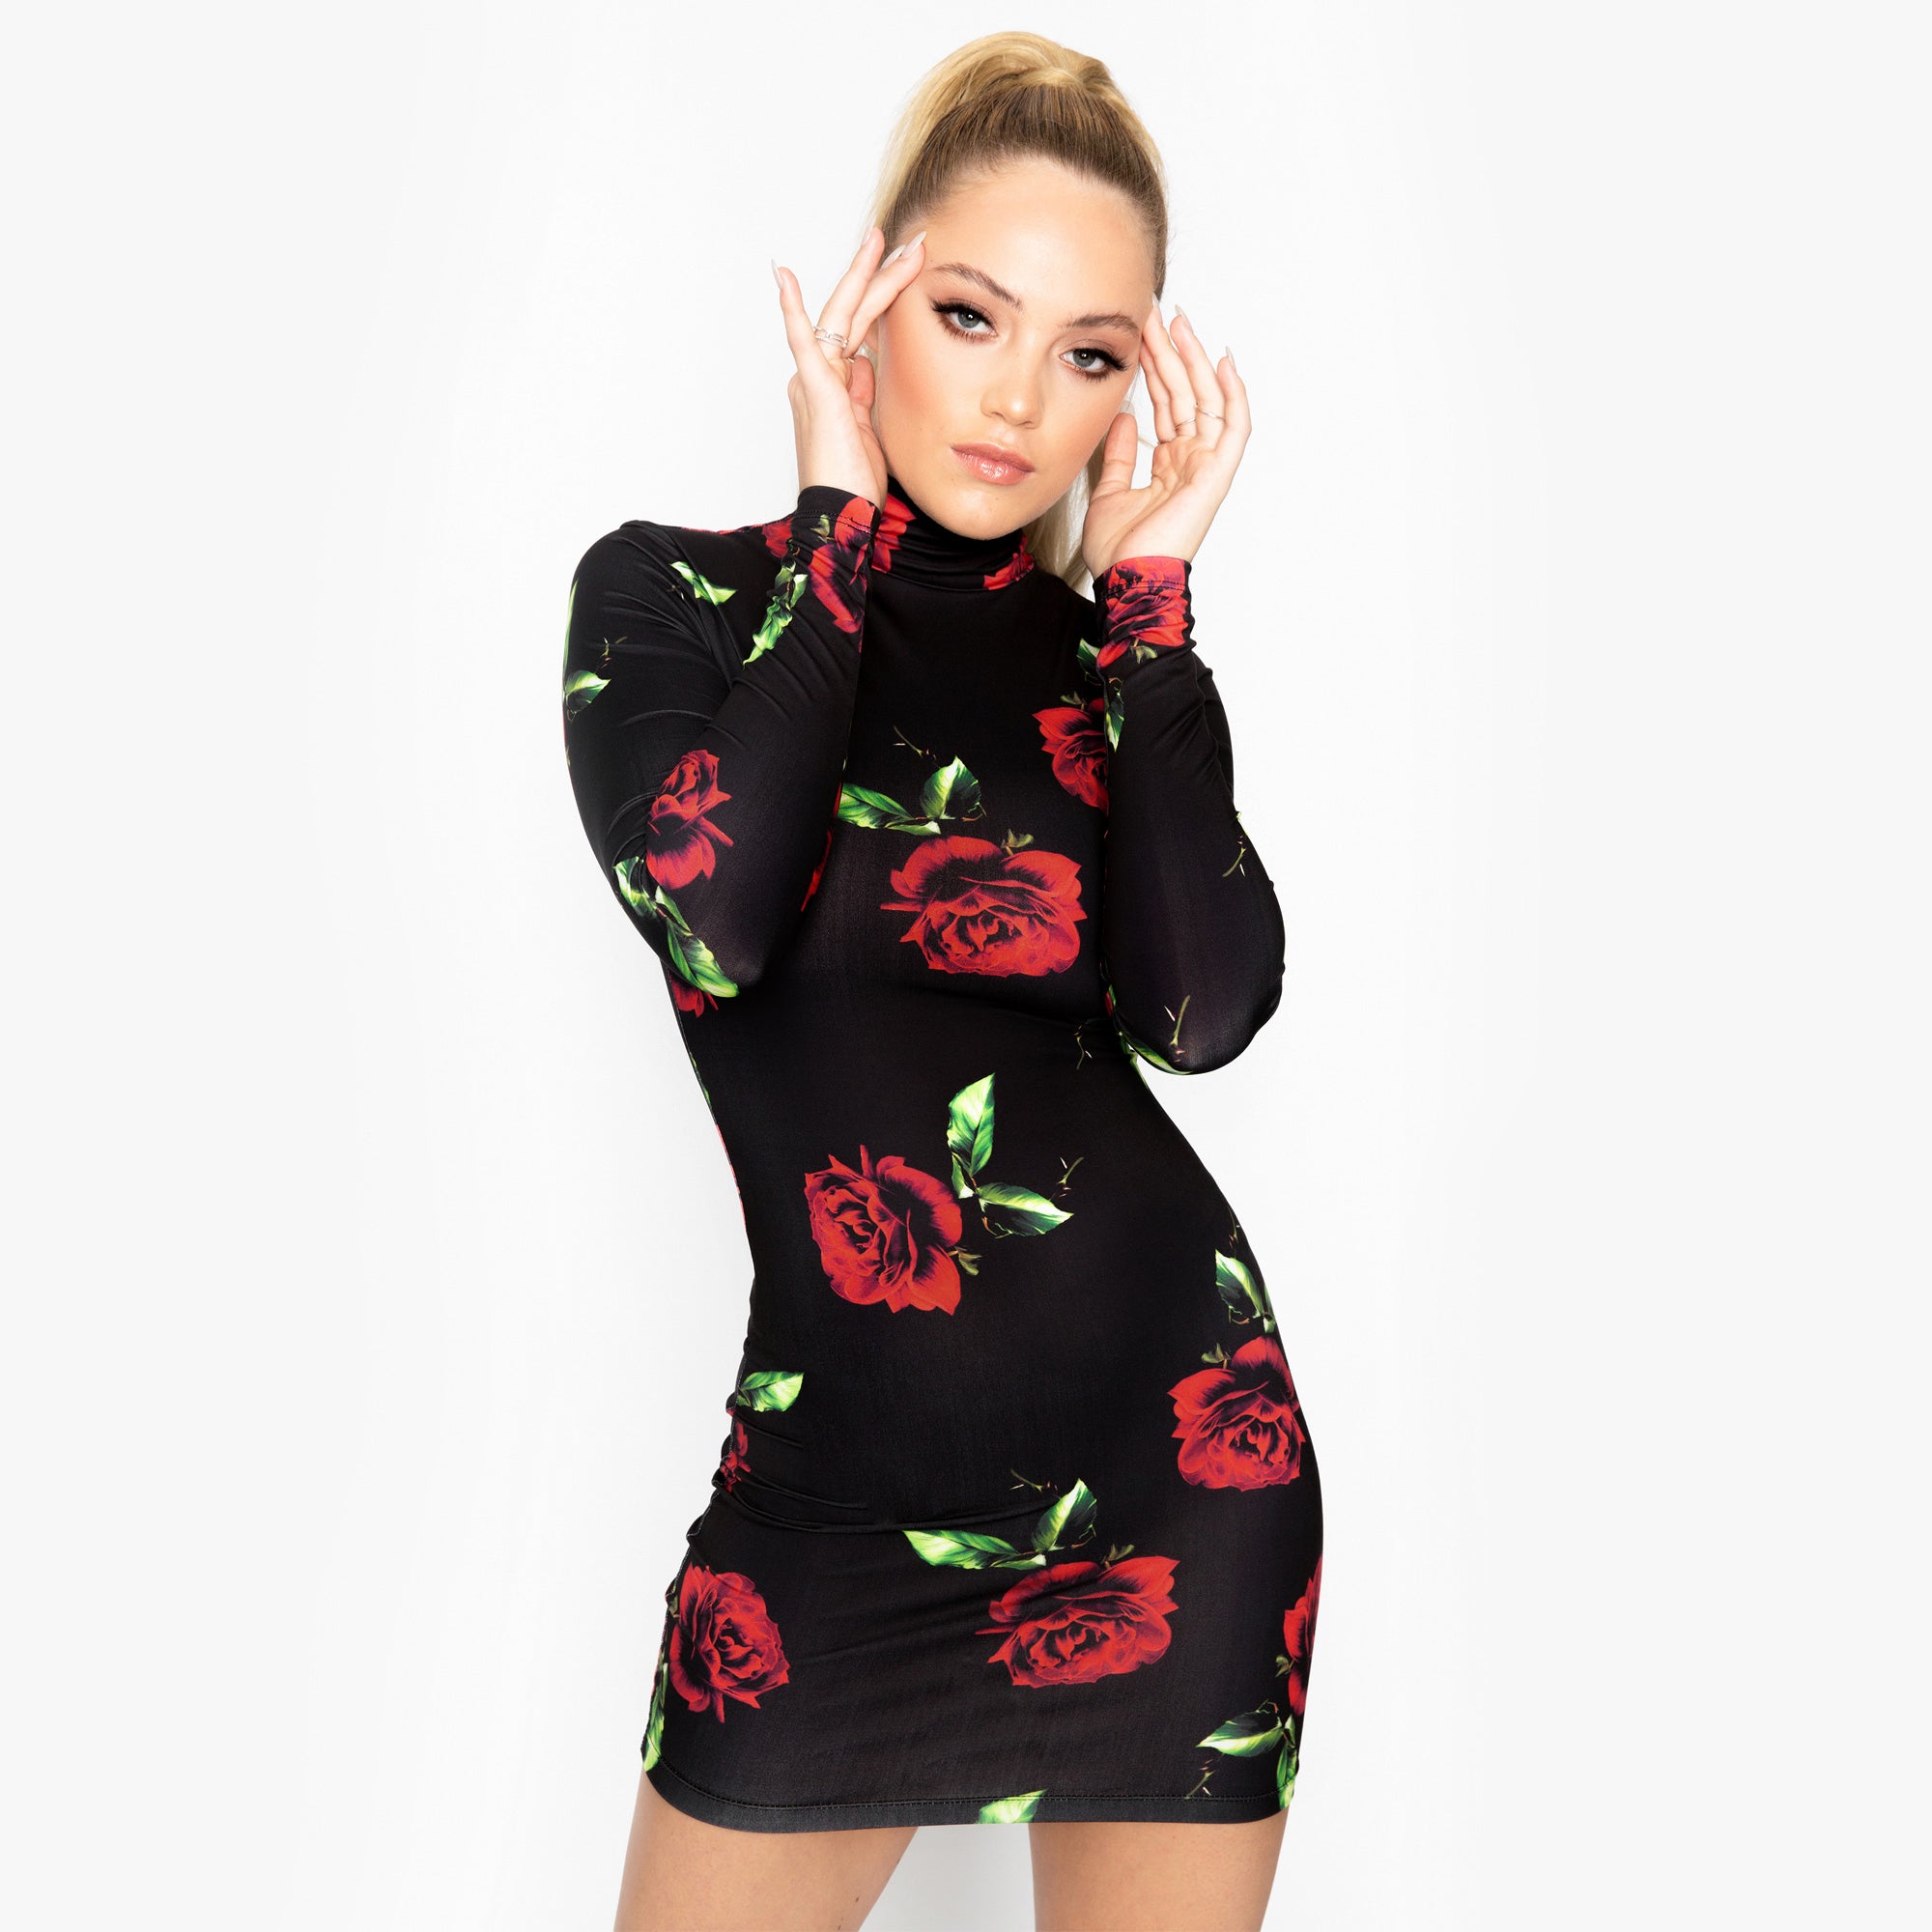 Dress Girl Official Red Jersey – Rose